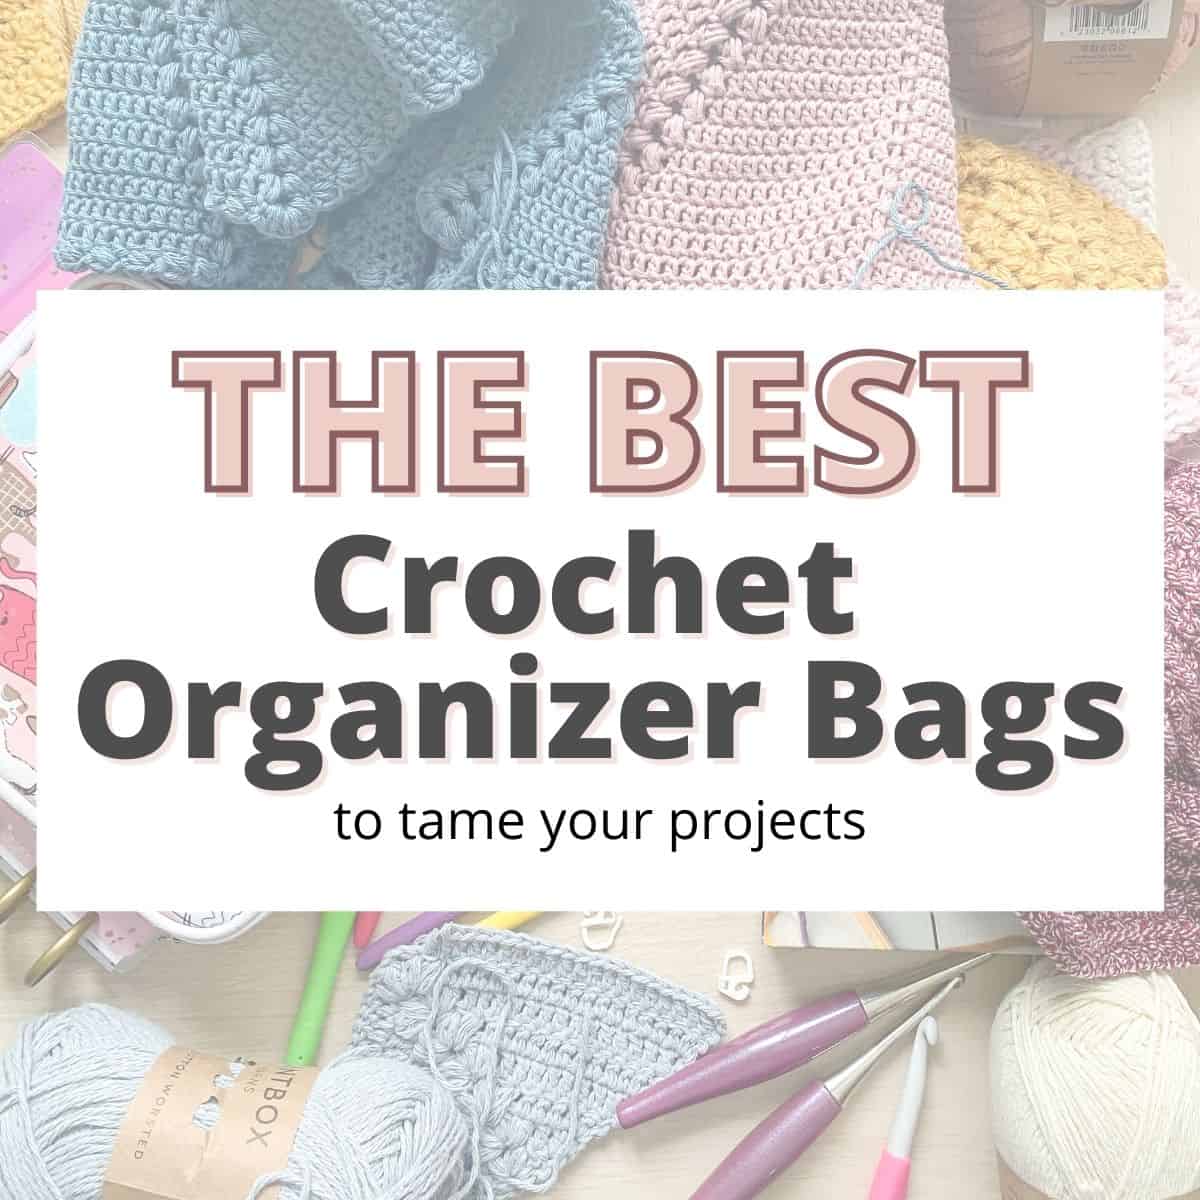 The Best Crochet Project Bags You Need To Organize Your WIPs